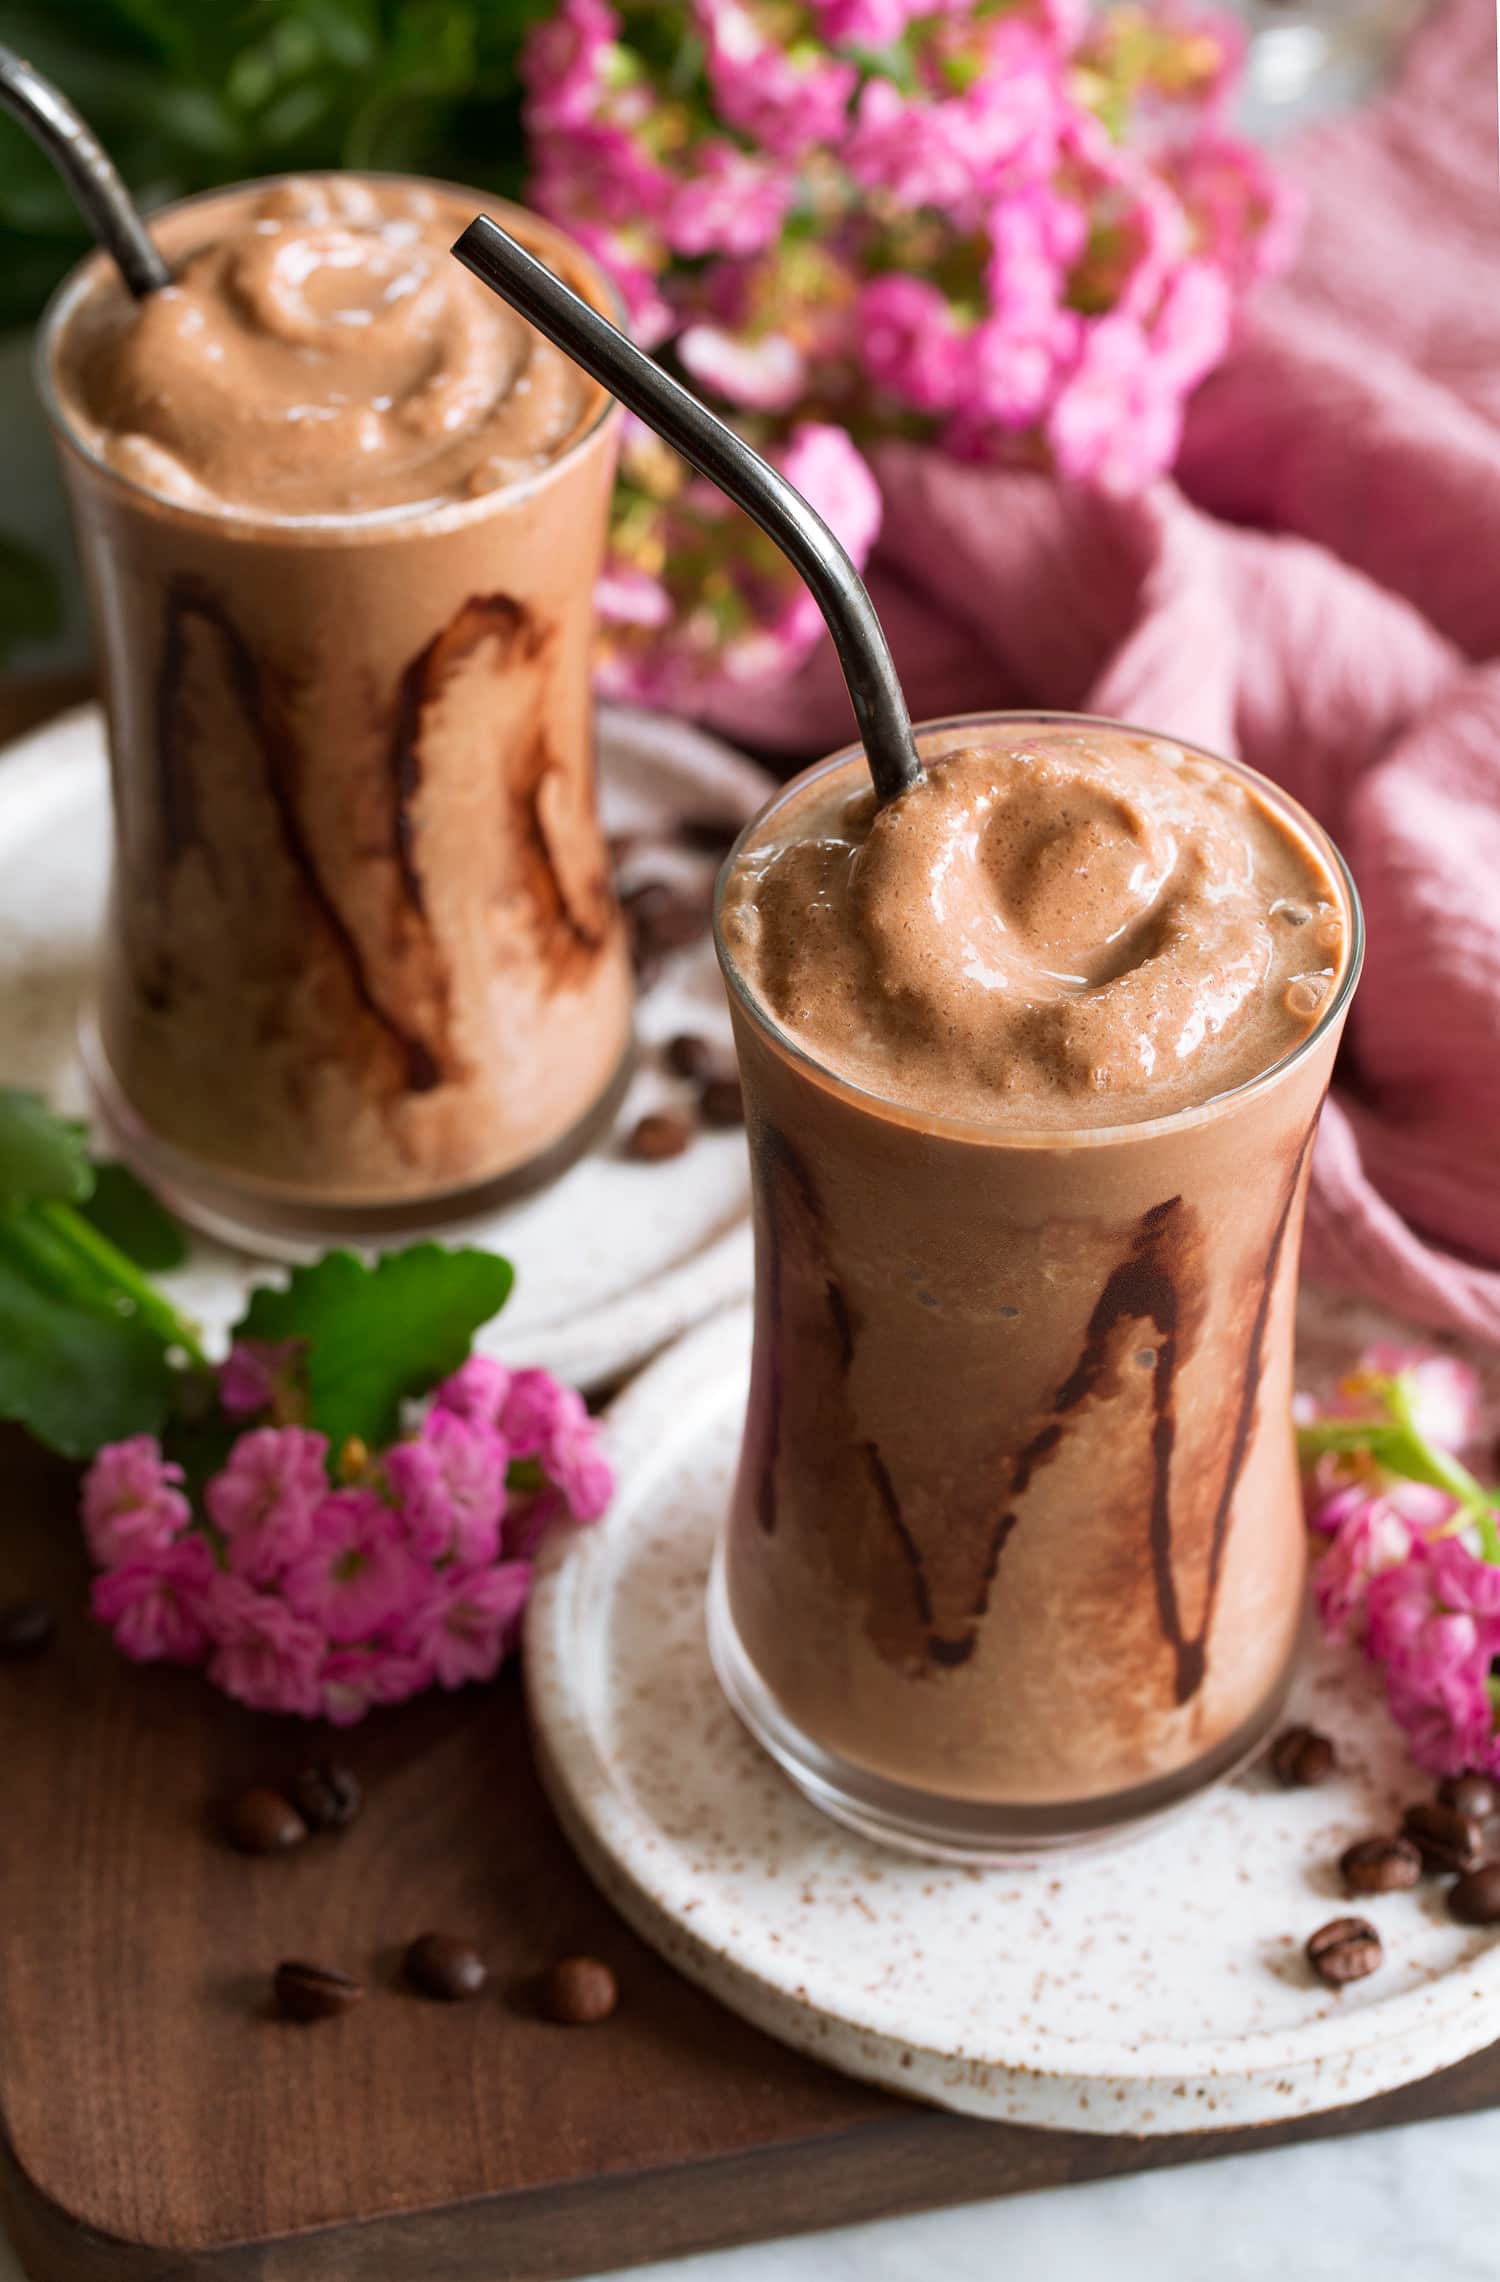 Two coffee smoothies shown without toppings.